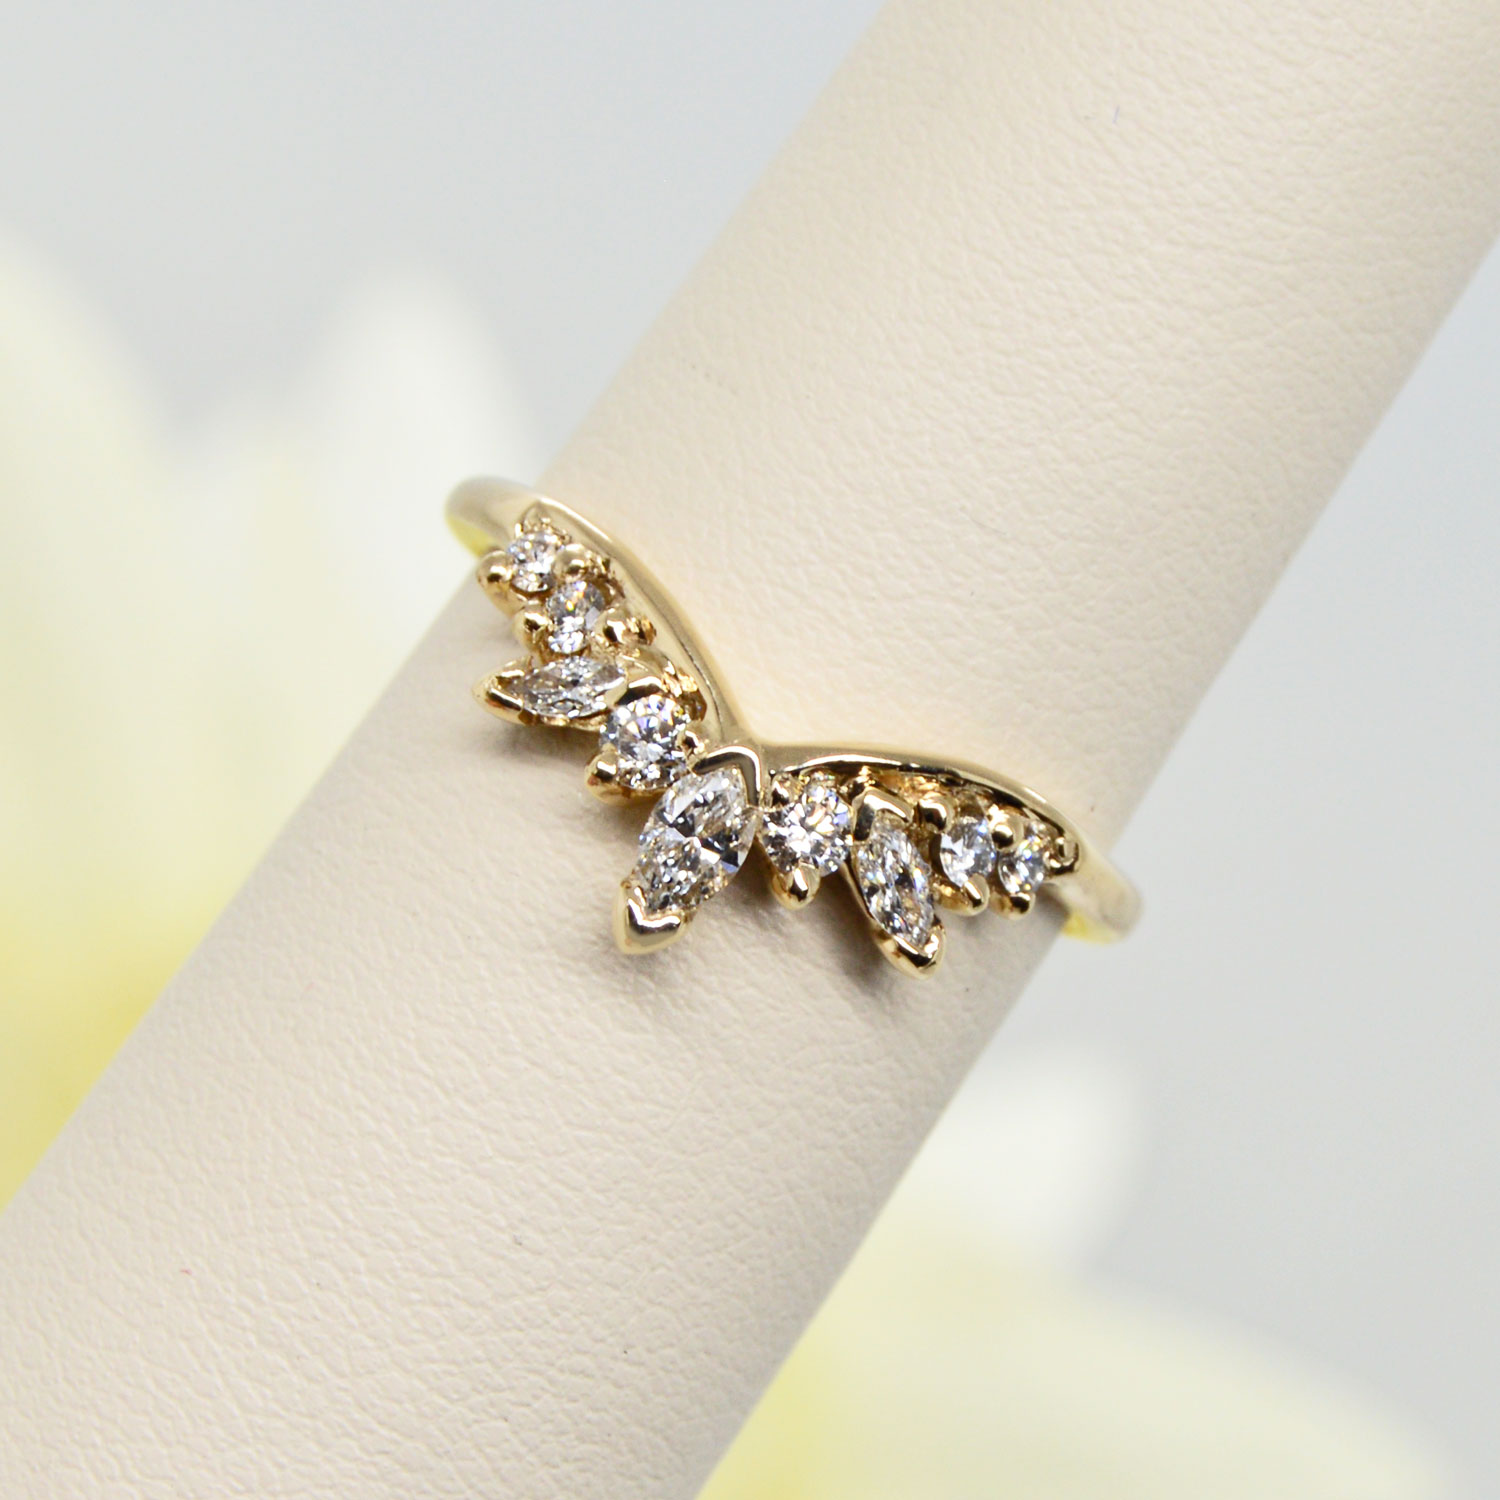 V ring with diamonds in 14K yellow gold